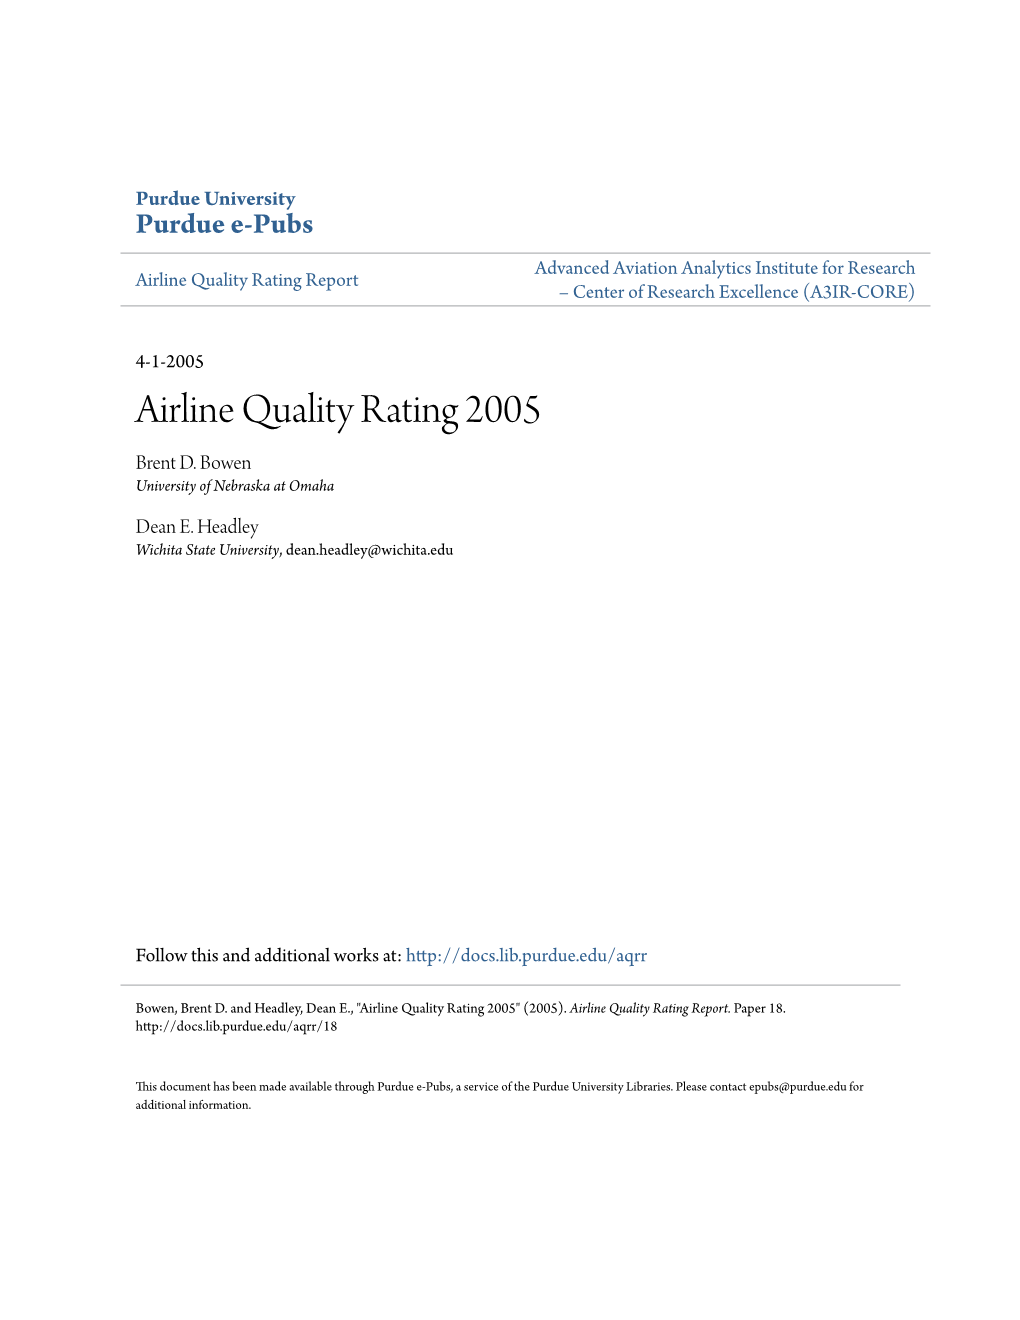 Airline Quality Rating 2005 Brent D